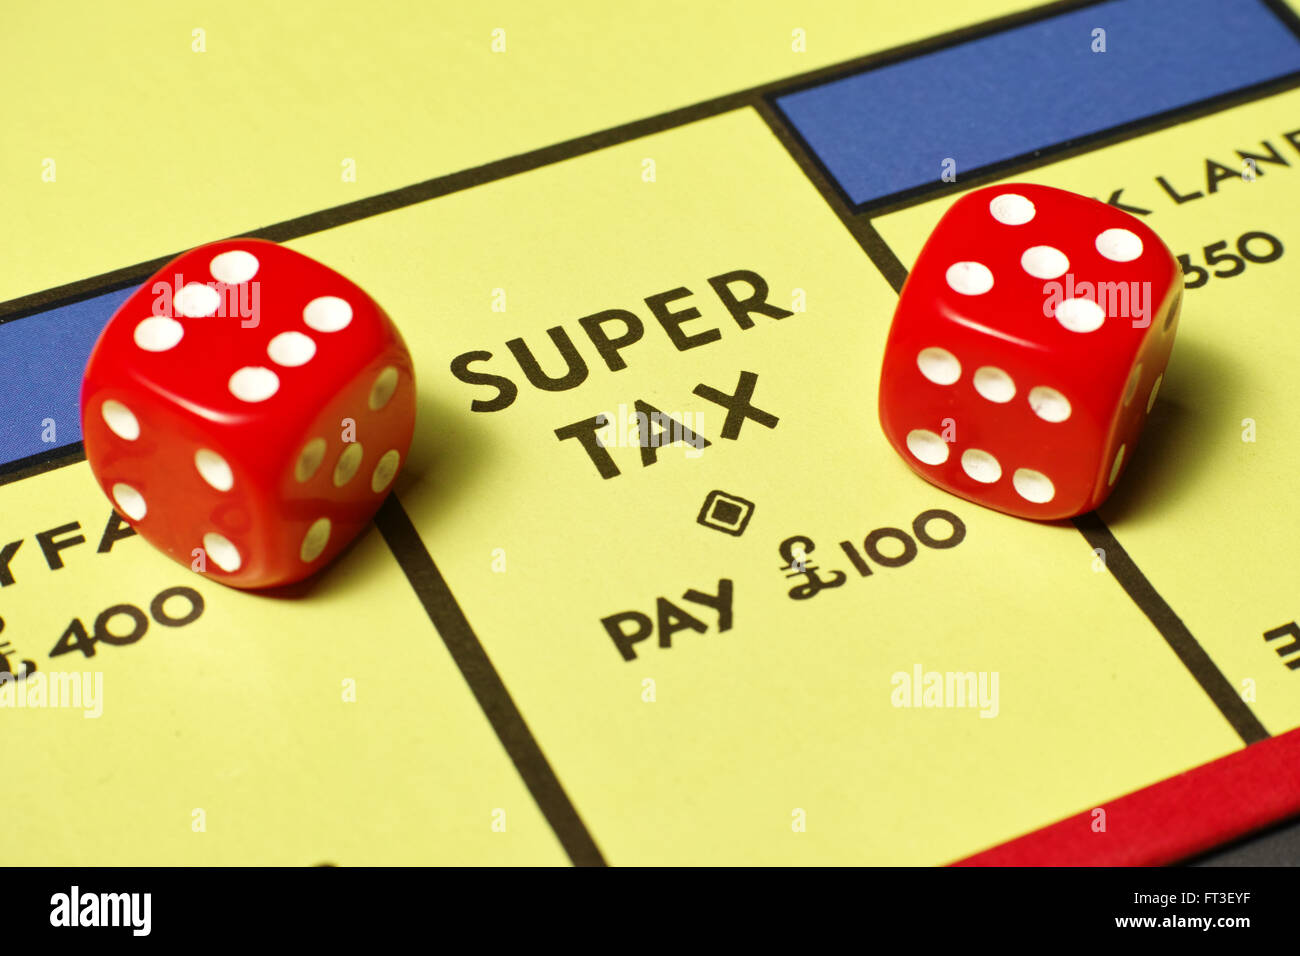 Super Tax demand on Monopoly board with red dice Stock Photo